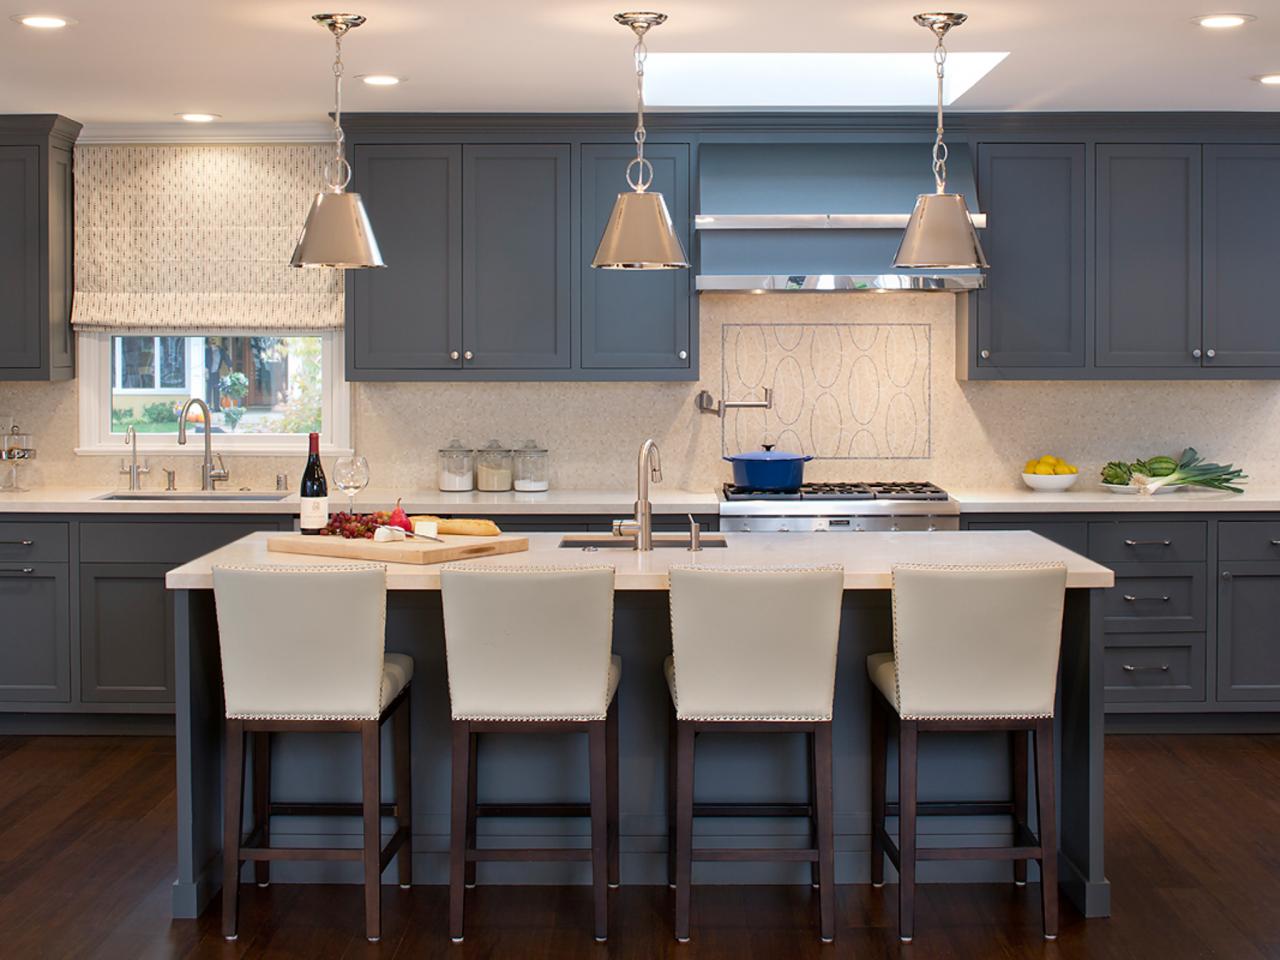 Kitchen Cabinet Paint Colors Pictures Ideas From Hgtv Hgtv